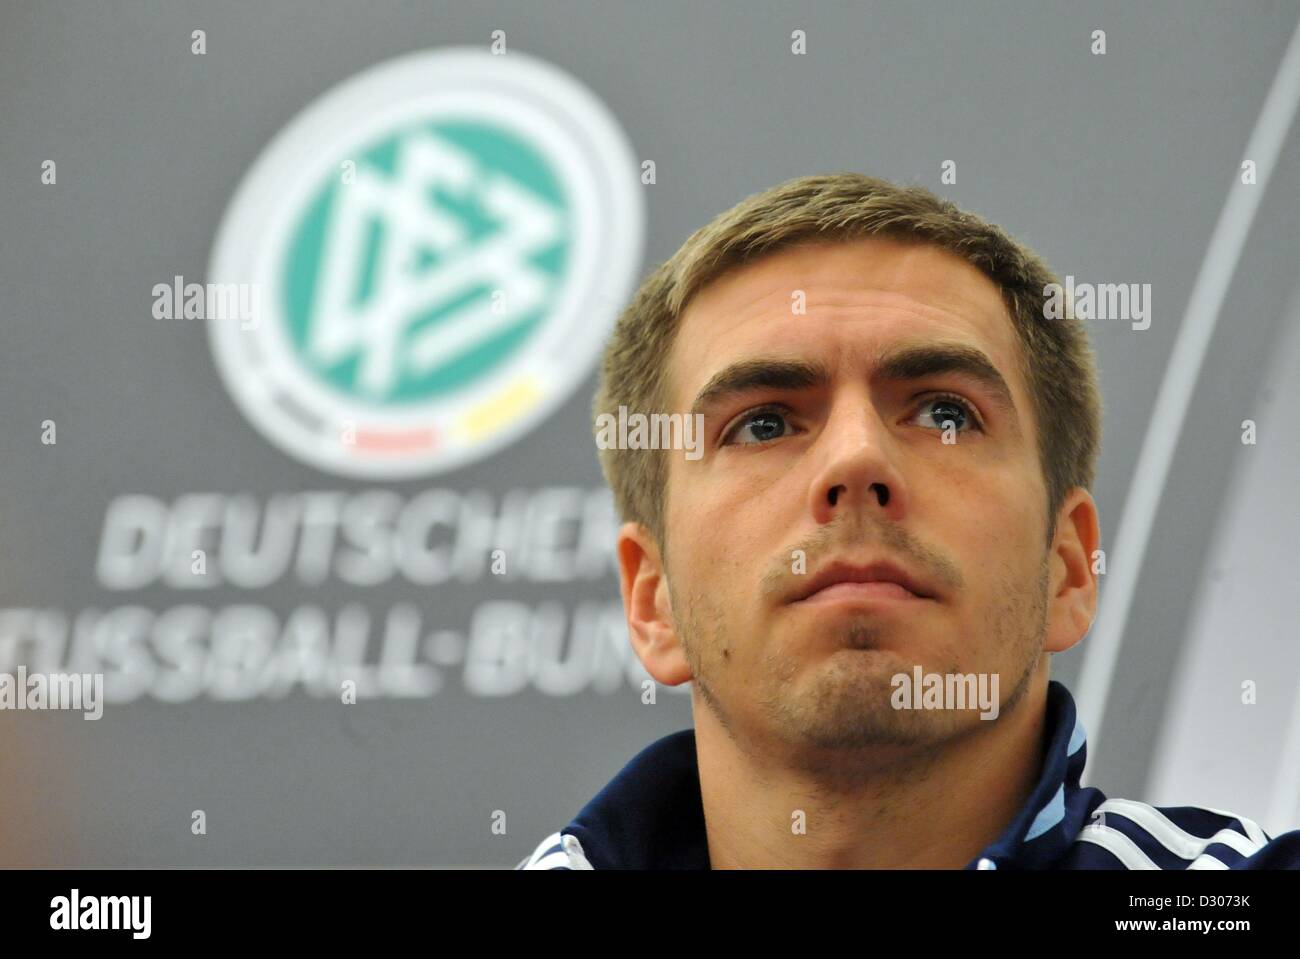 Paris, France. 5th February 2013. Germany's captain Philipp Lahm takes part in a press conference held by the German national soccer team in Paris, France, 05 February 2013. German will play France on 06 February 2013. Photo: ANDREAS GEBERT/dpa/Alamy Live News Stock Photo